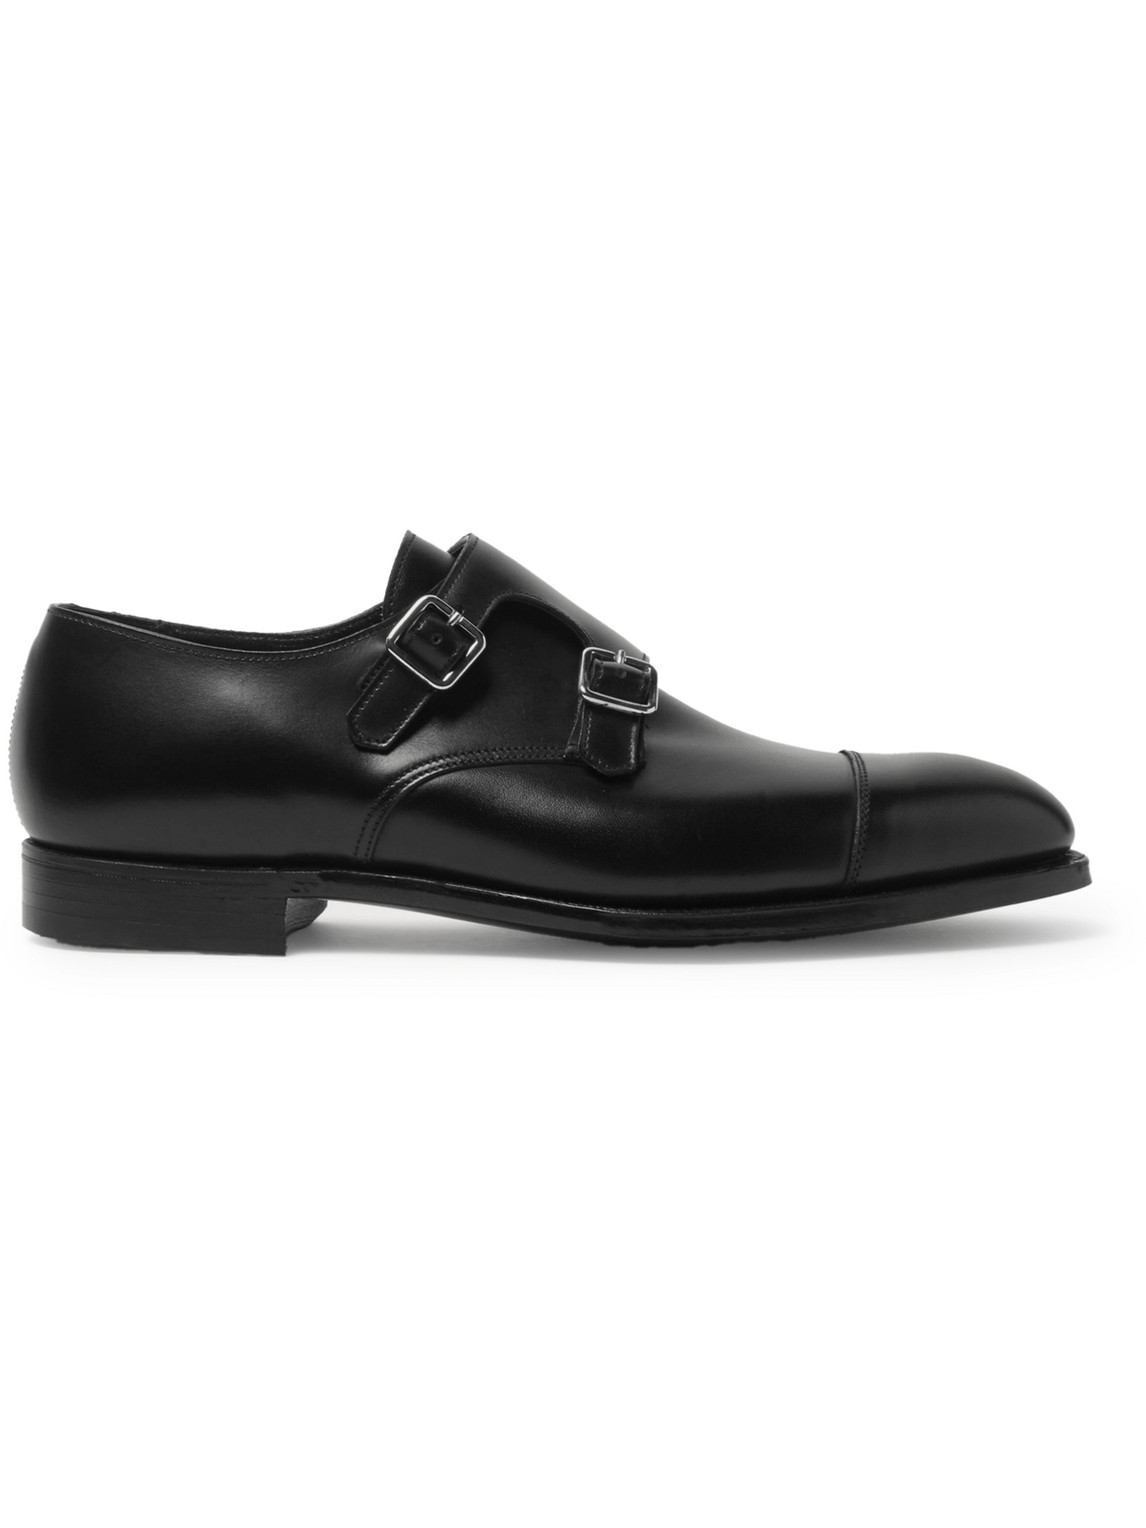 George Cleverley Thomas Cap-toe Leather Monk-strap Shoes In Black